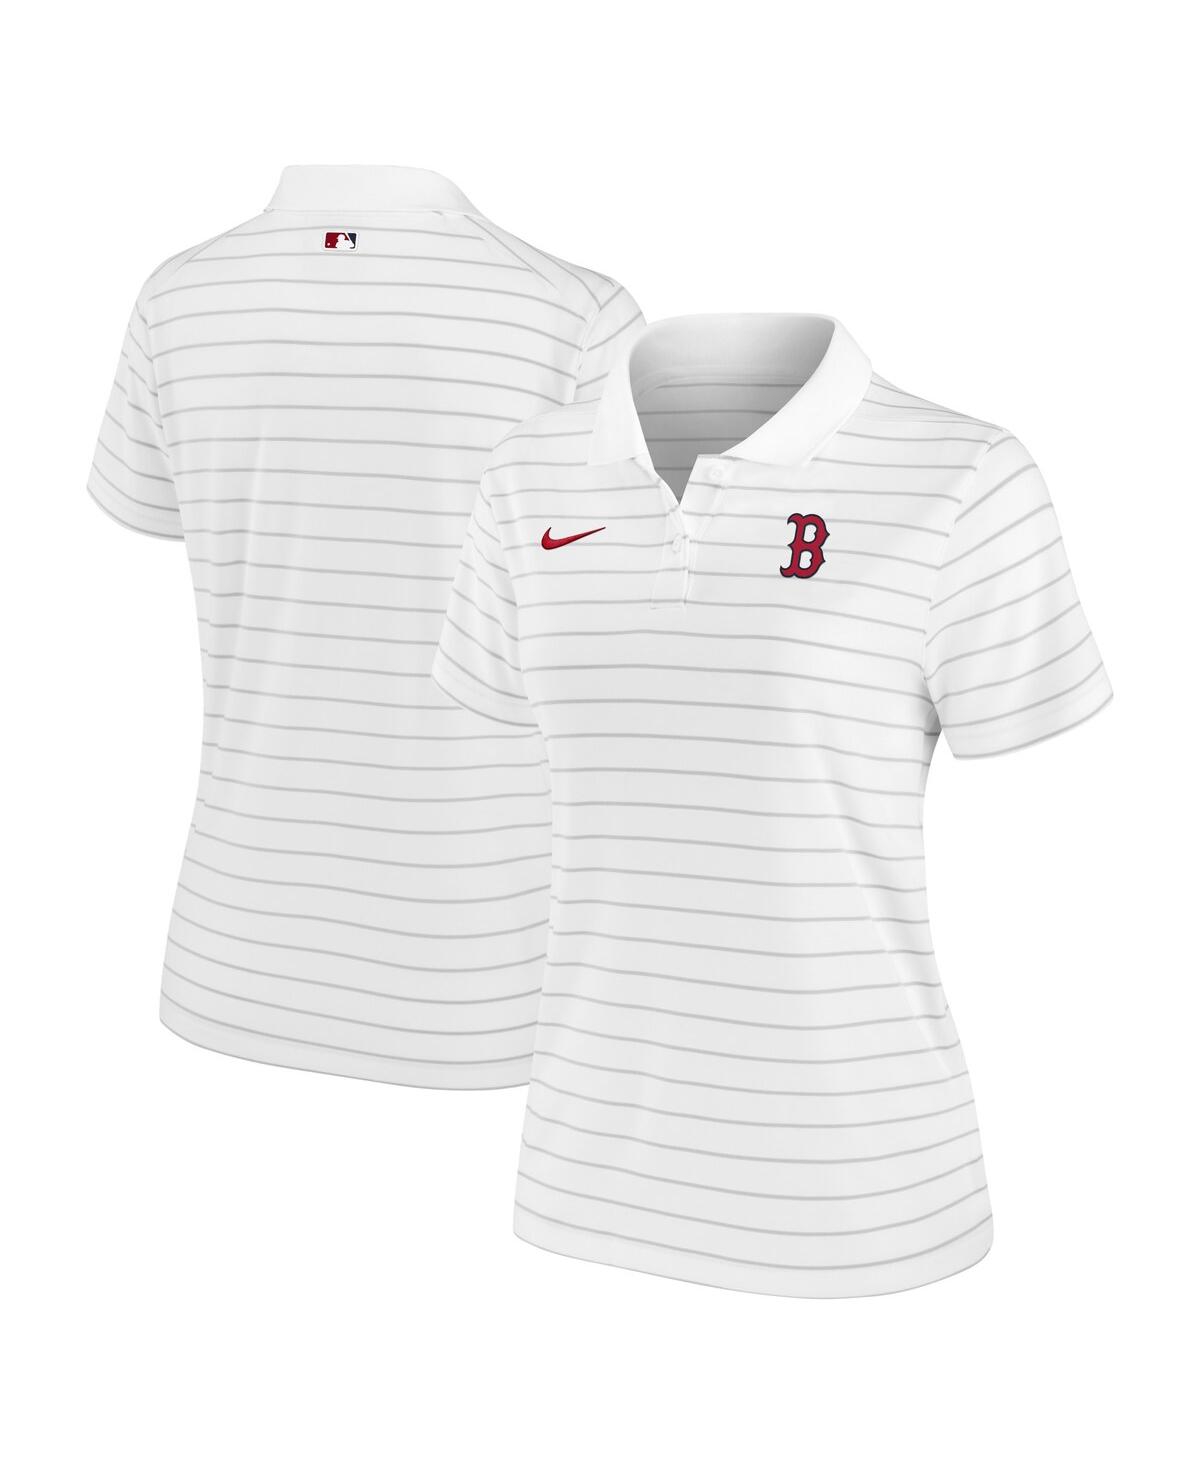 Shop Nike Women's  White Boston Red Sox Authentic Collection Victory Performance Polo Shirt